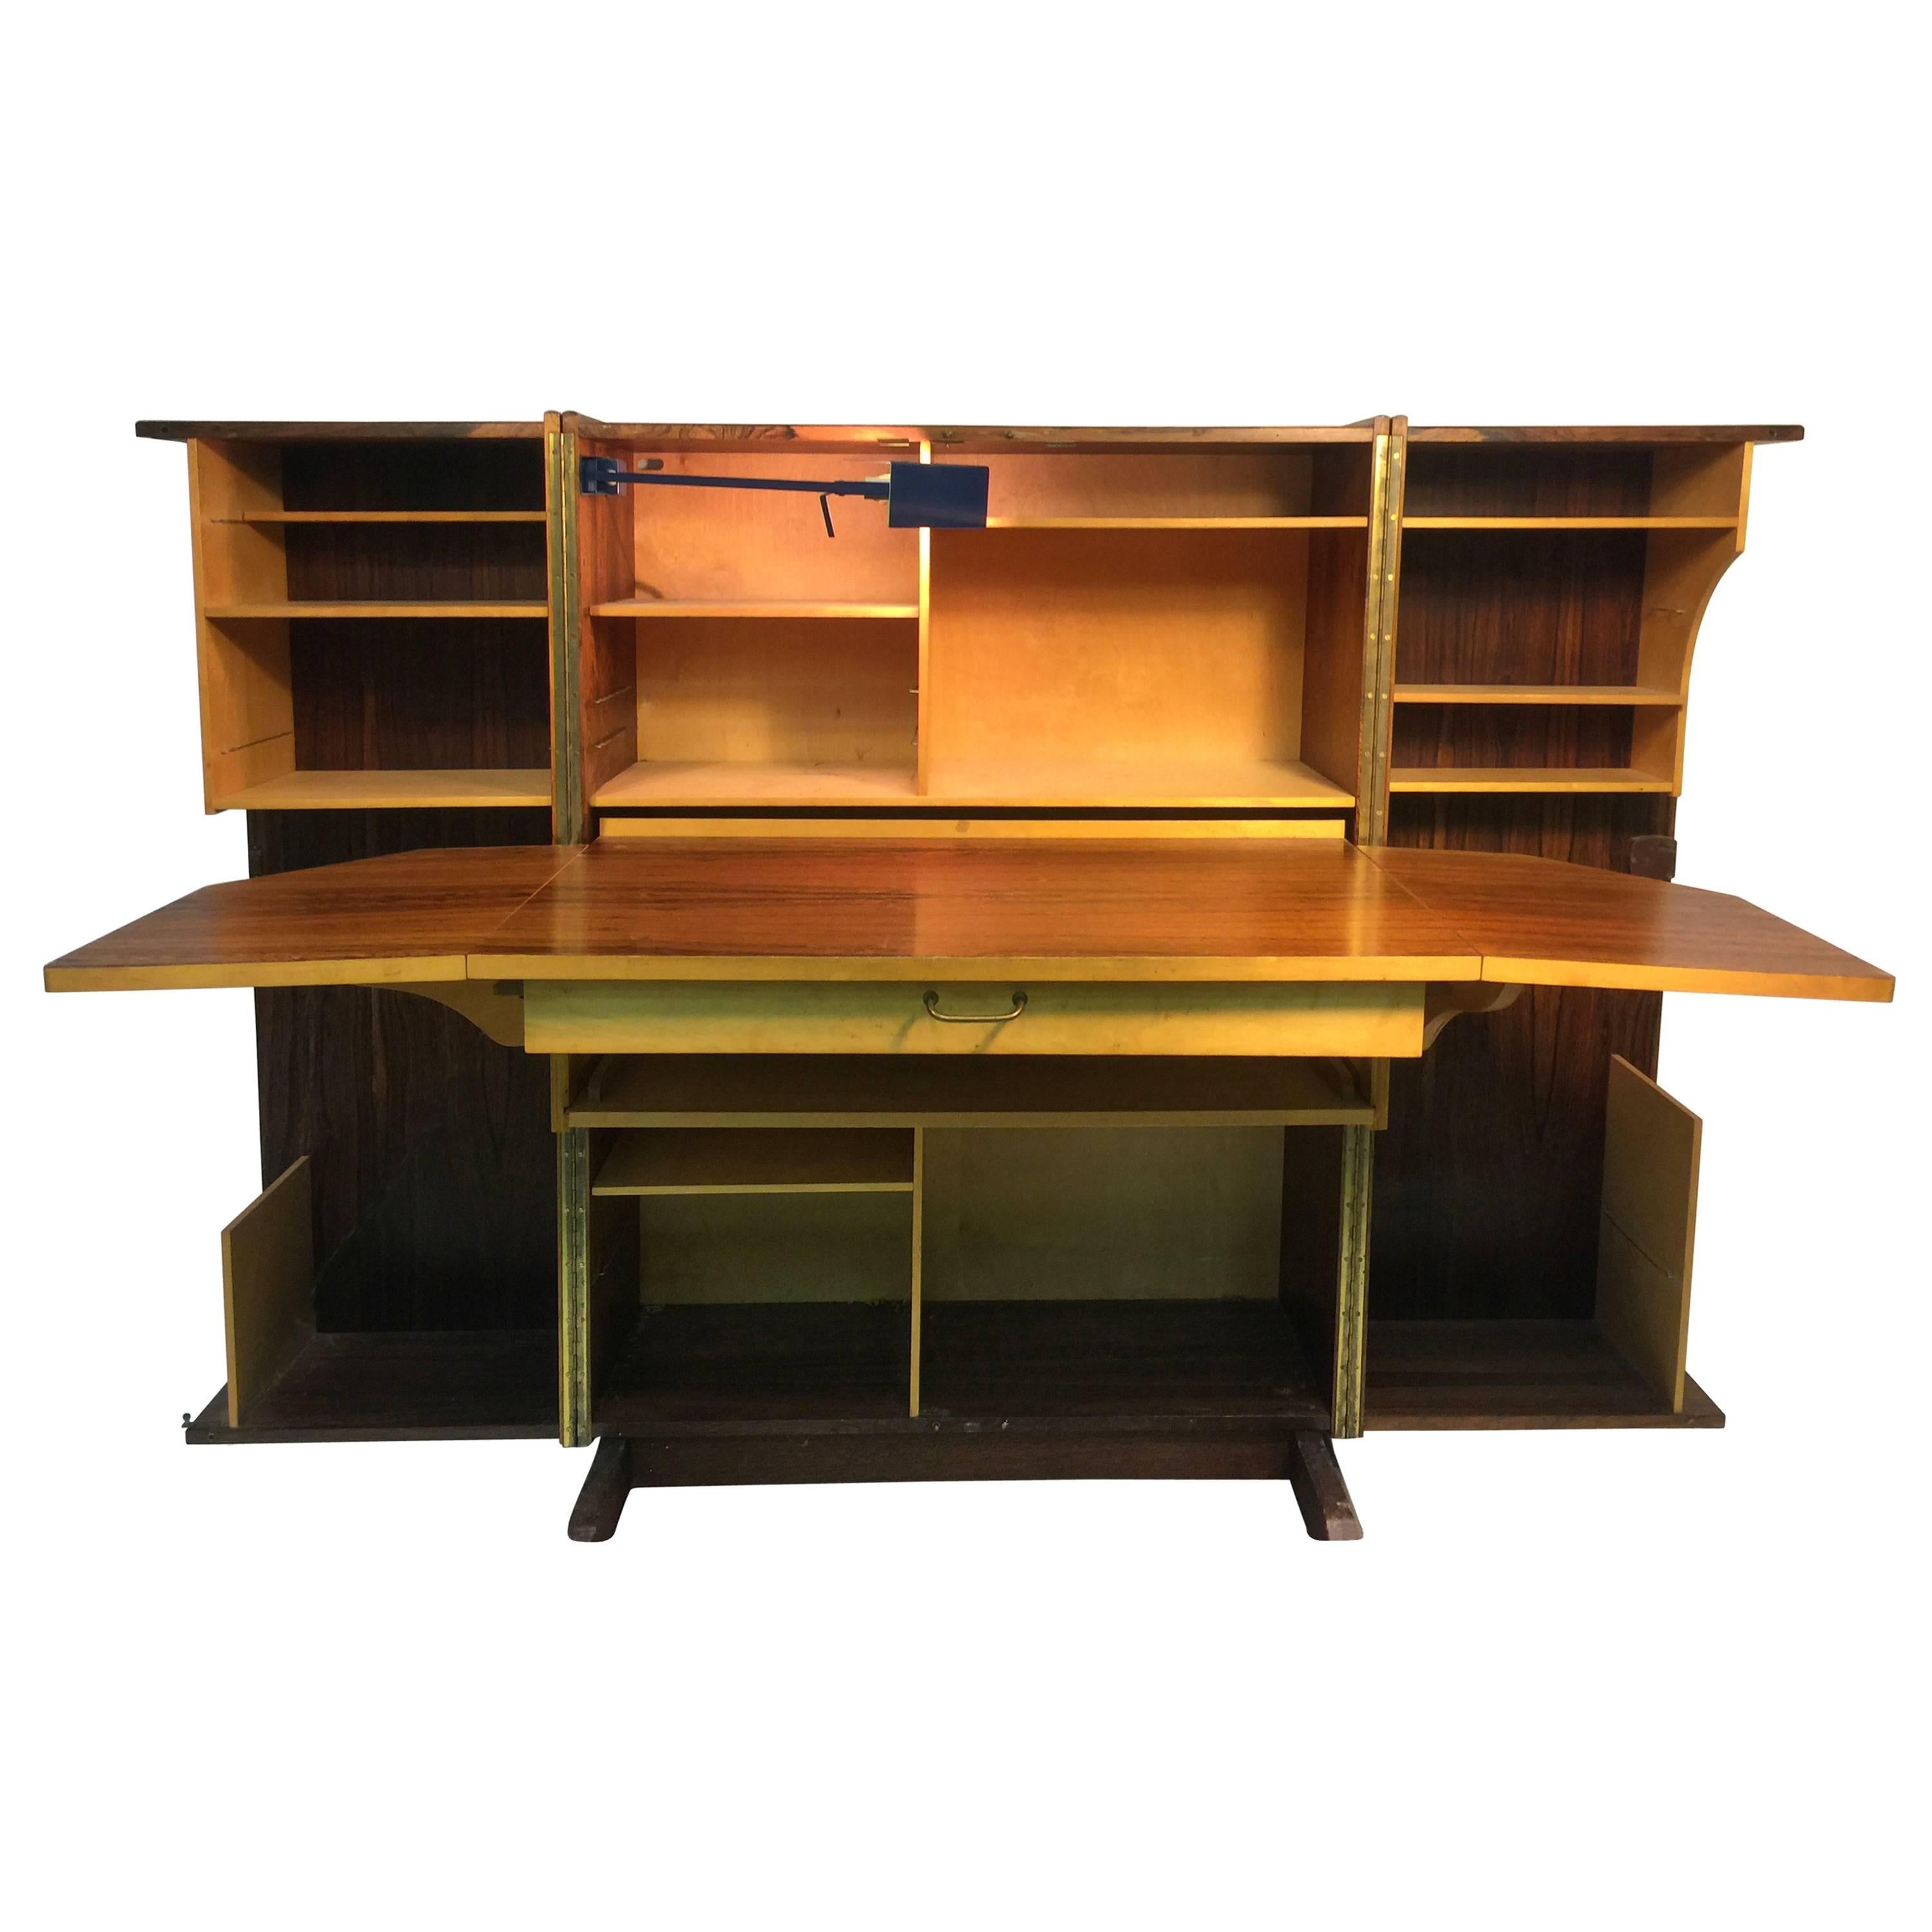 Incredible “Magic Box” Secrecy Desk by Mumenthaler and Meier For Sale